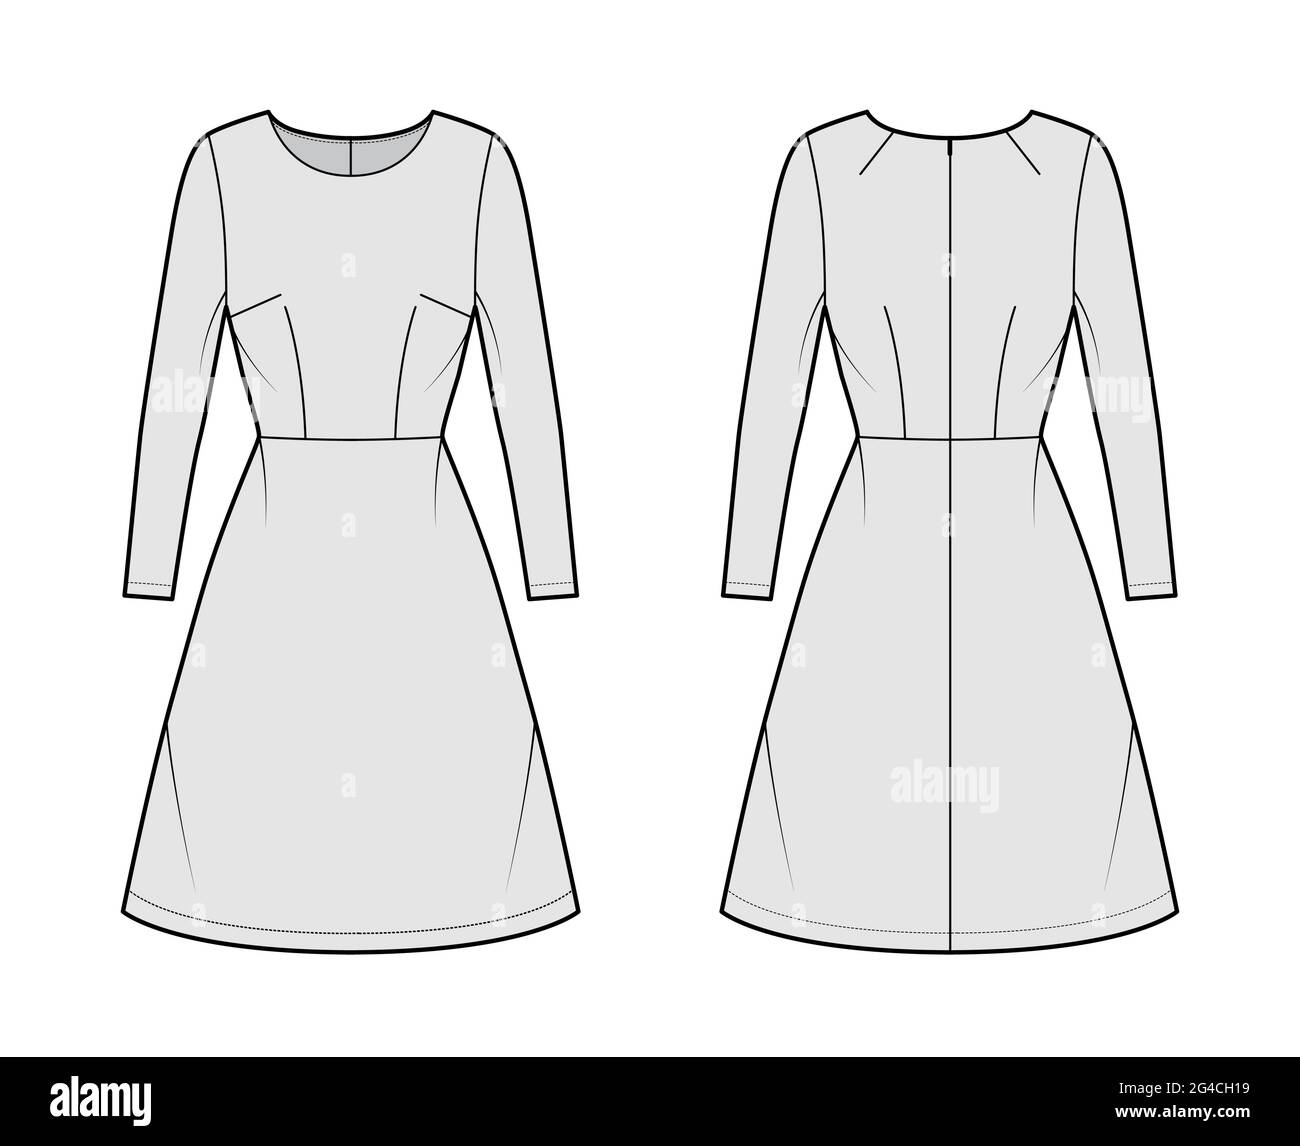 Dress A-line technical fashion illustration with long sleeves, fitted ...